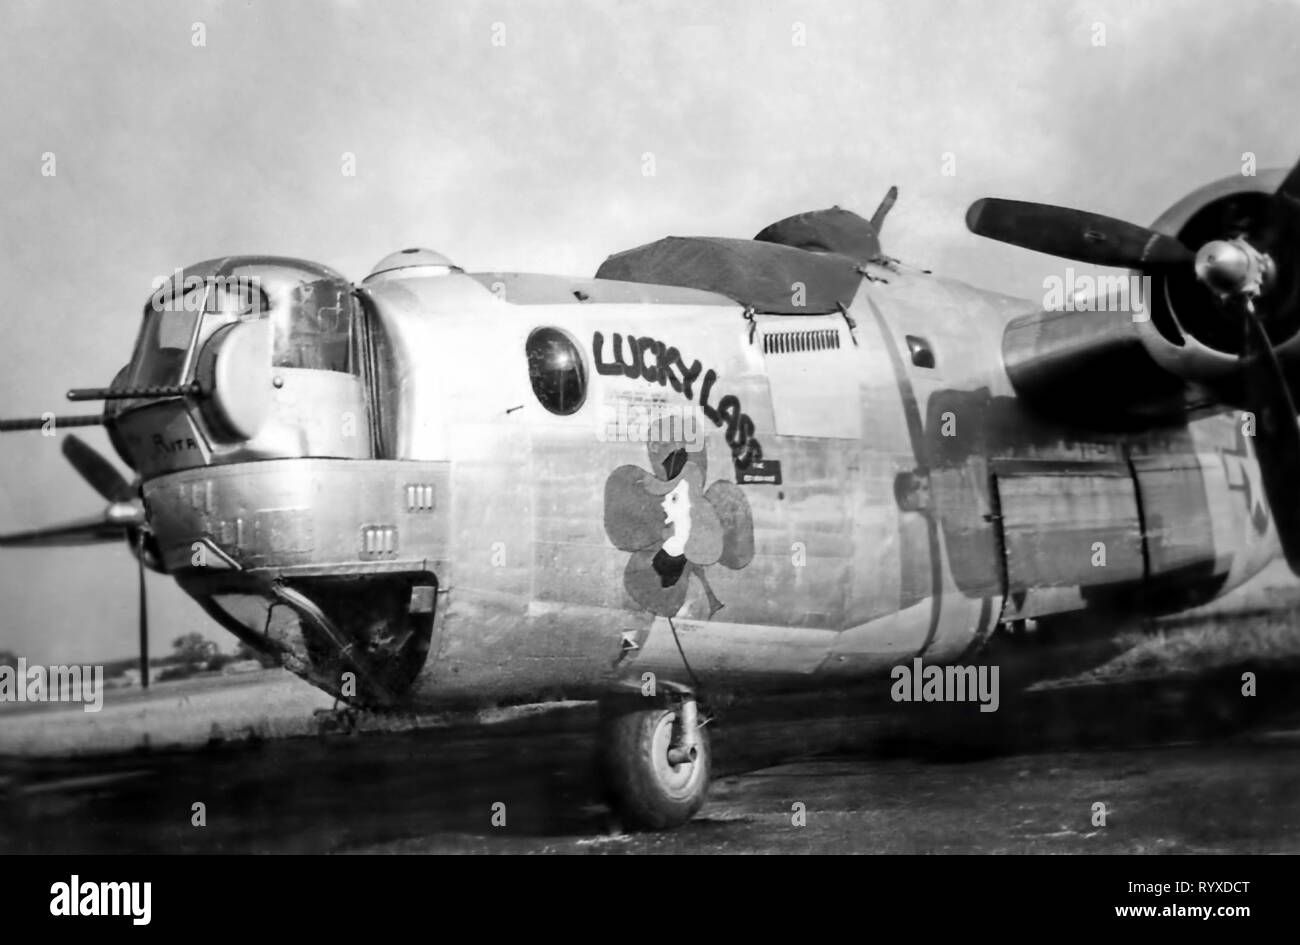 Personal photographs and memorabilia of fighting Americans during the Second World War. B-24 Liberator heavy bomber nose art. Stock Photo